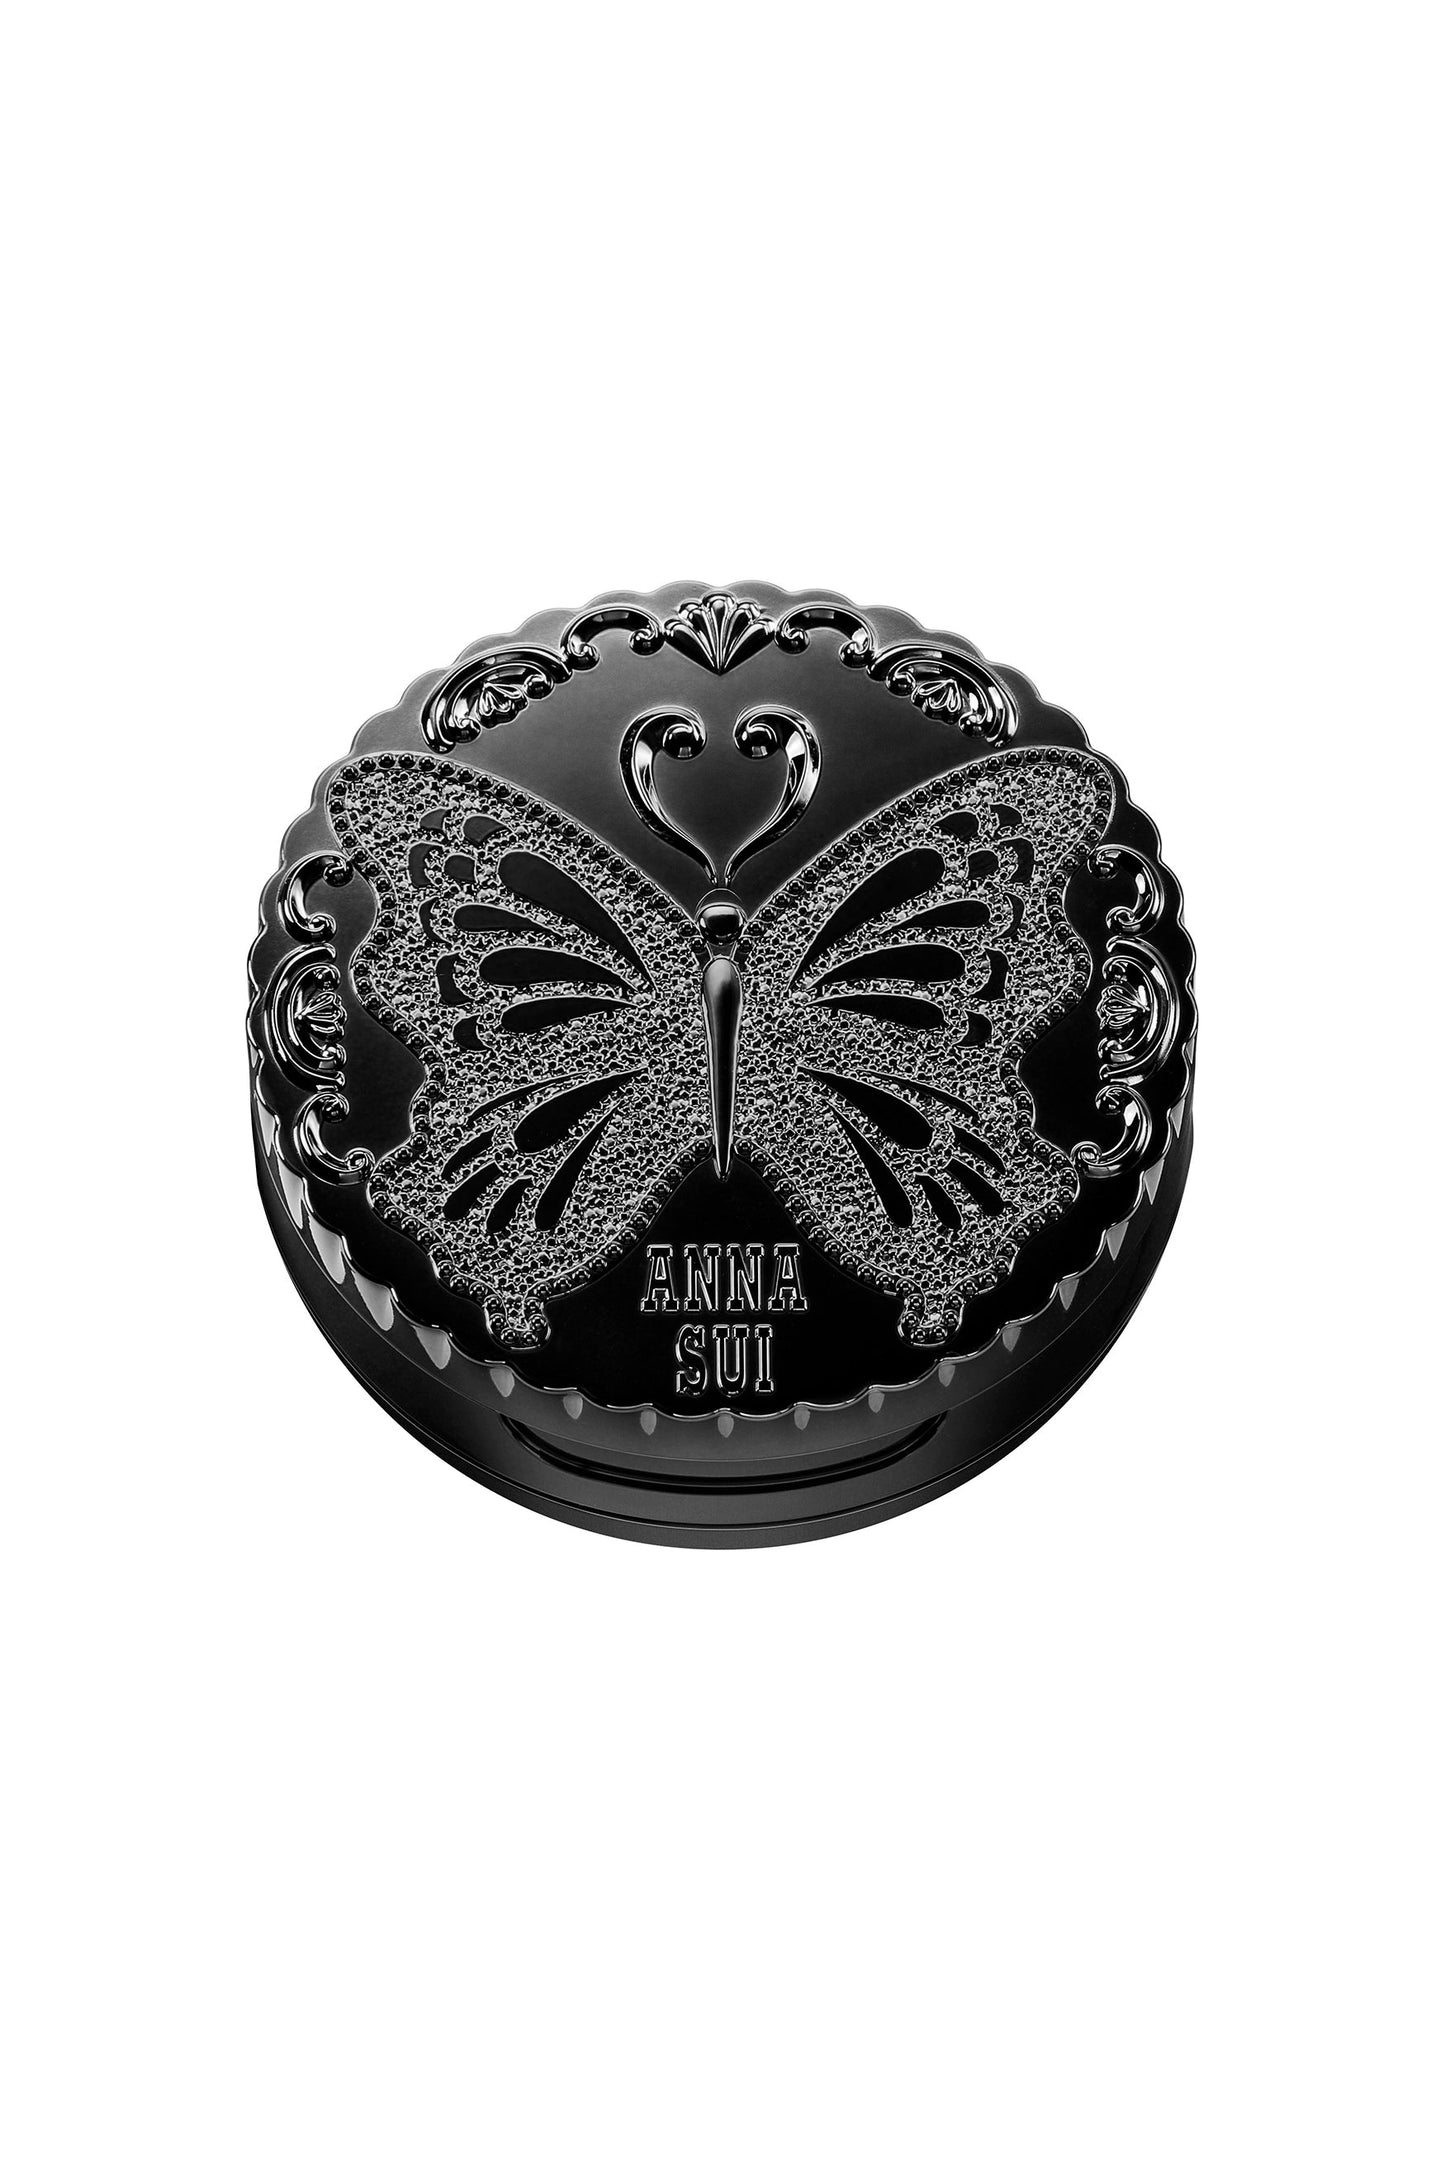 Classic Loose Powder, black round box with a butterfly engrave on top with  Anna Sui label. 